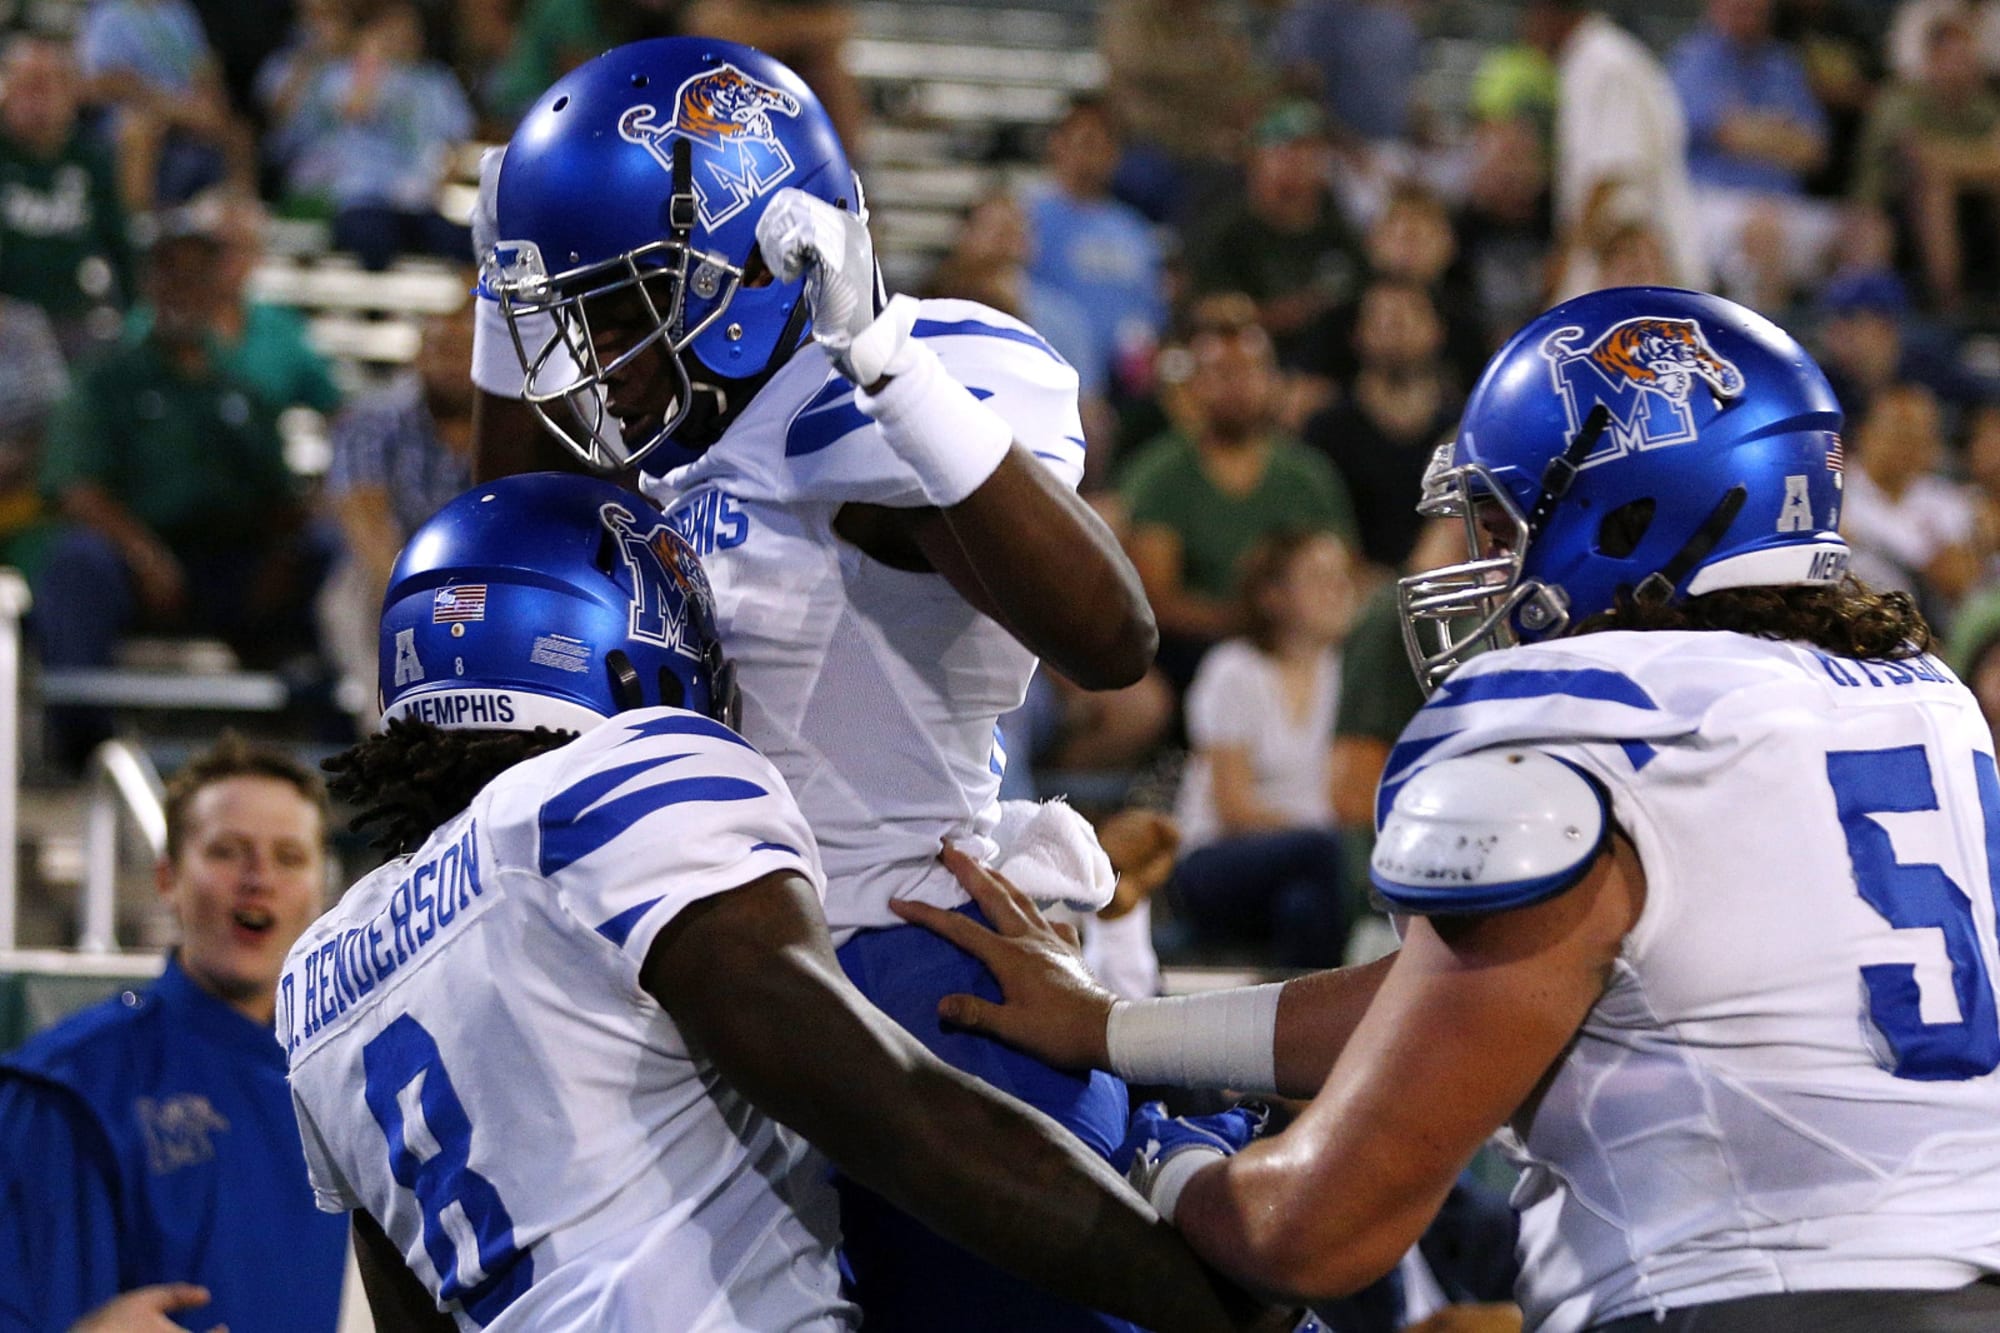 Memphis Football Sitewide Predictions for the Mercer Game